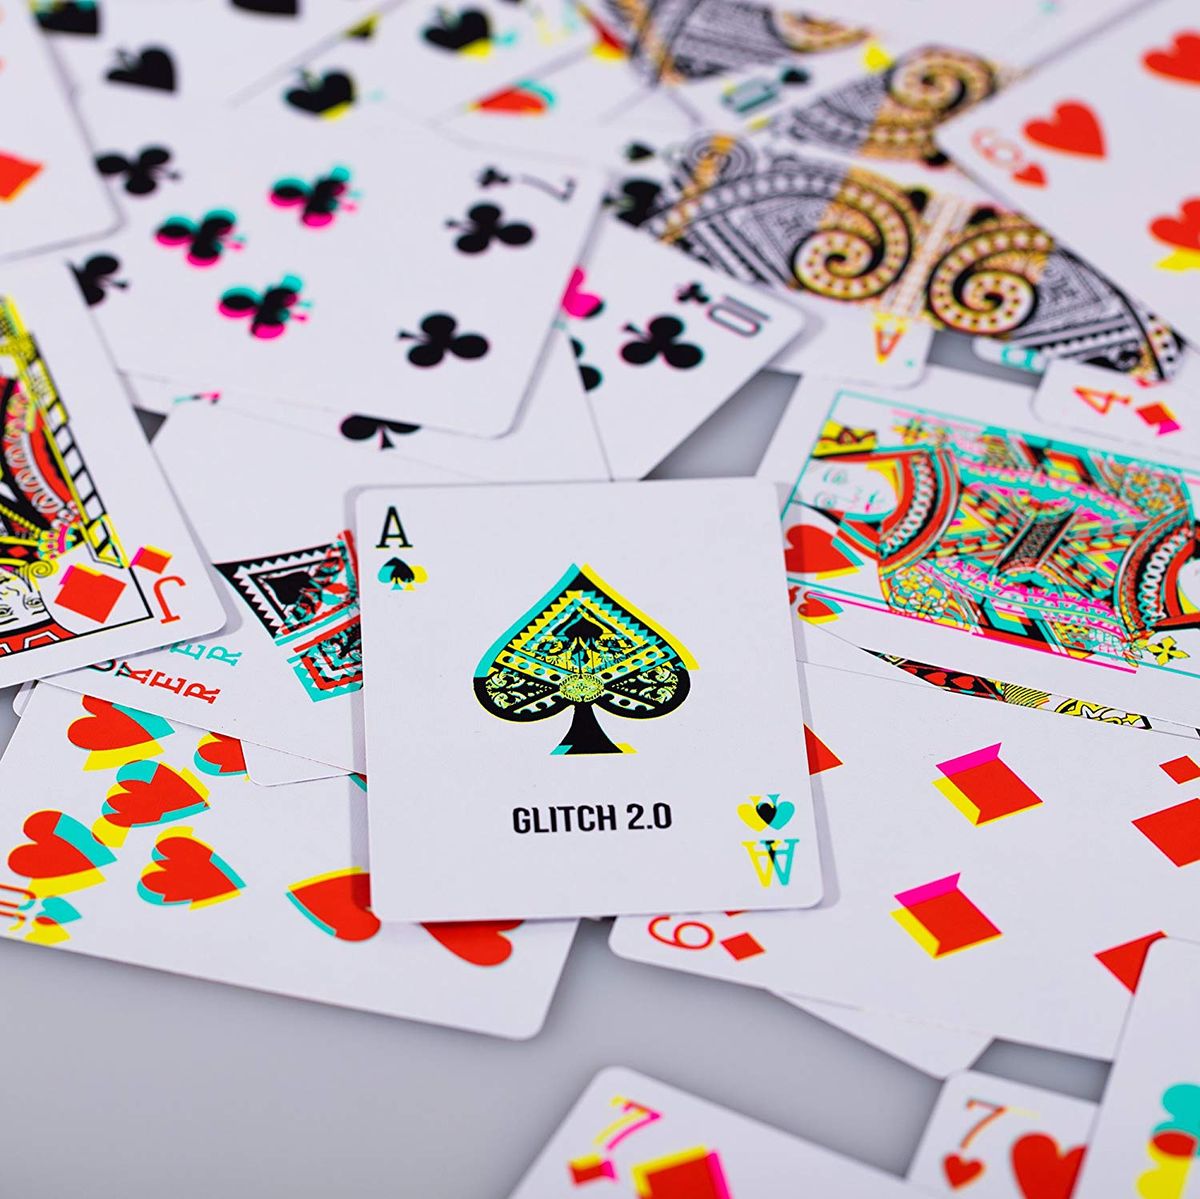 These Glitch art playing cards will give everyone a headache at your next poker night